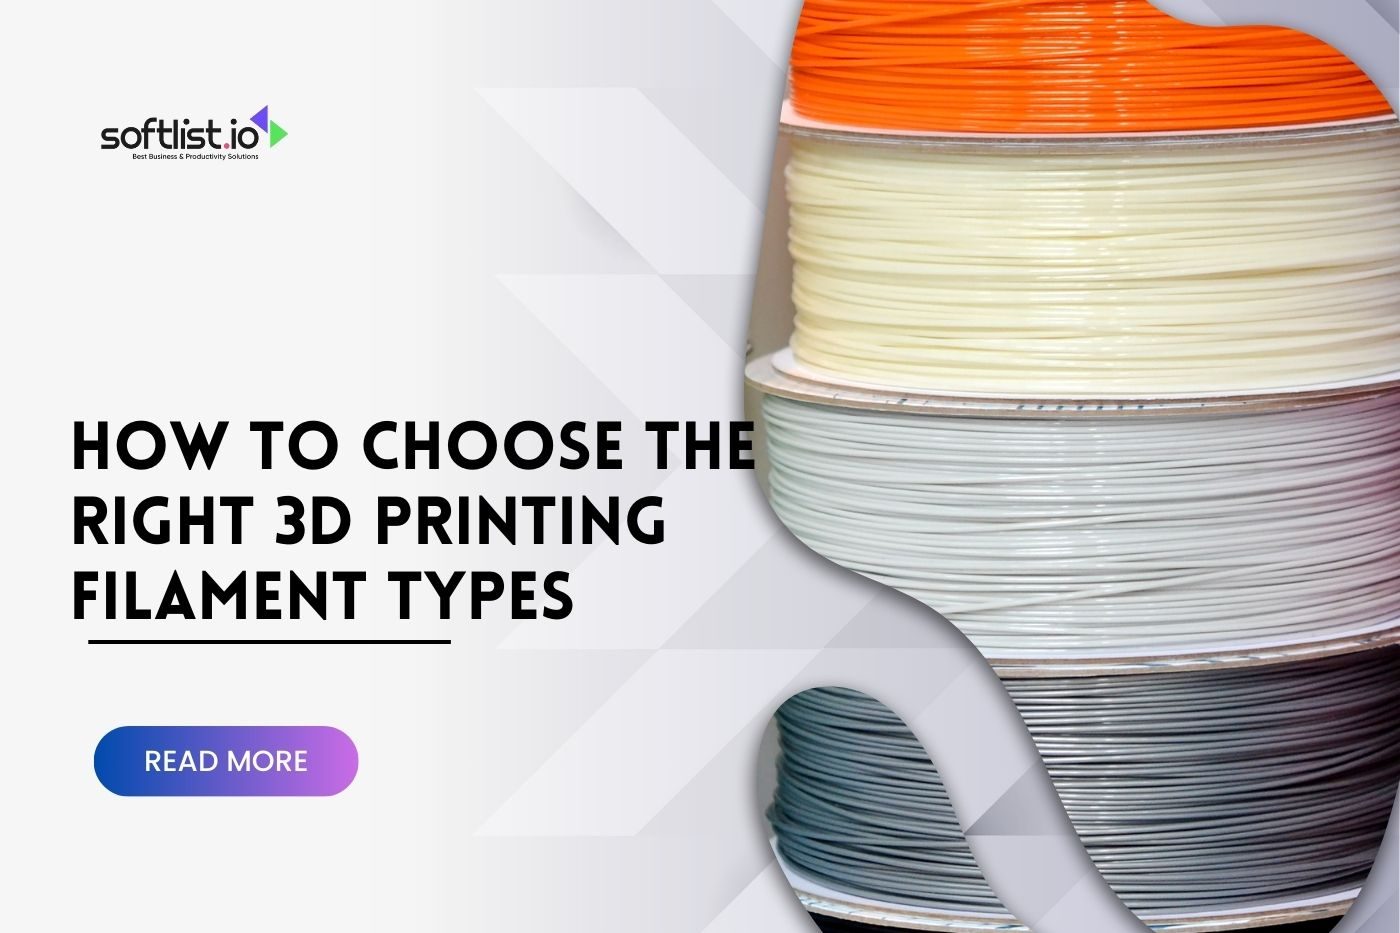 How to Choose the Right 3D Printing Filament Types